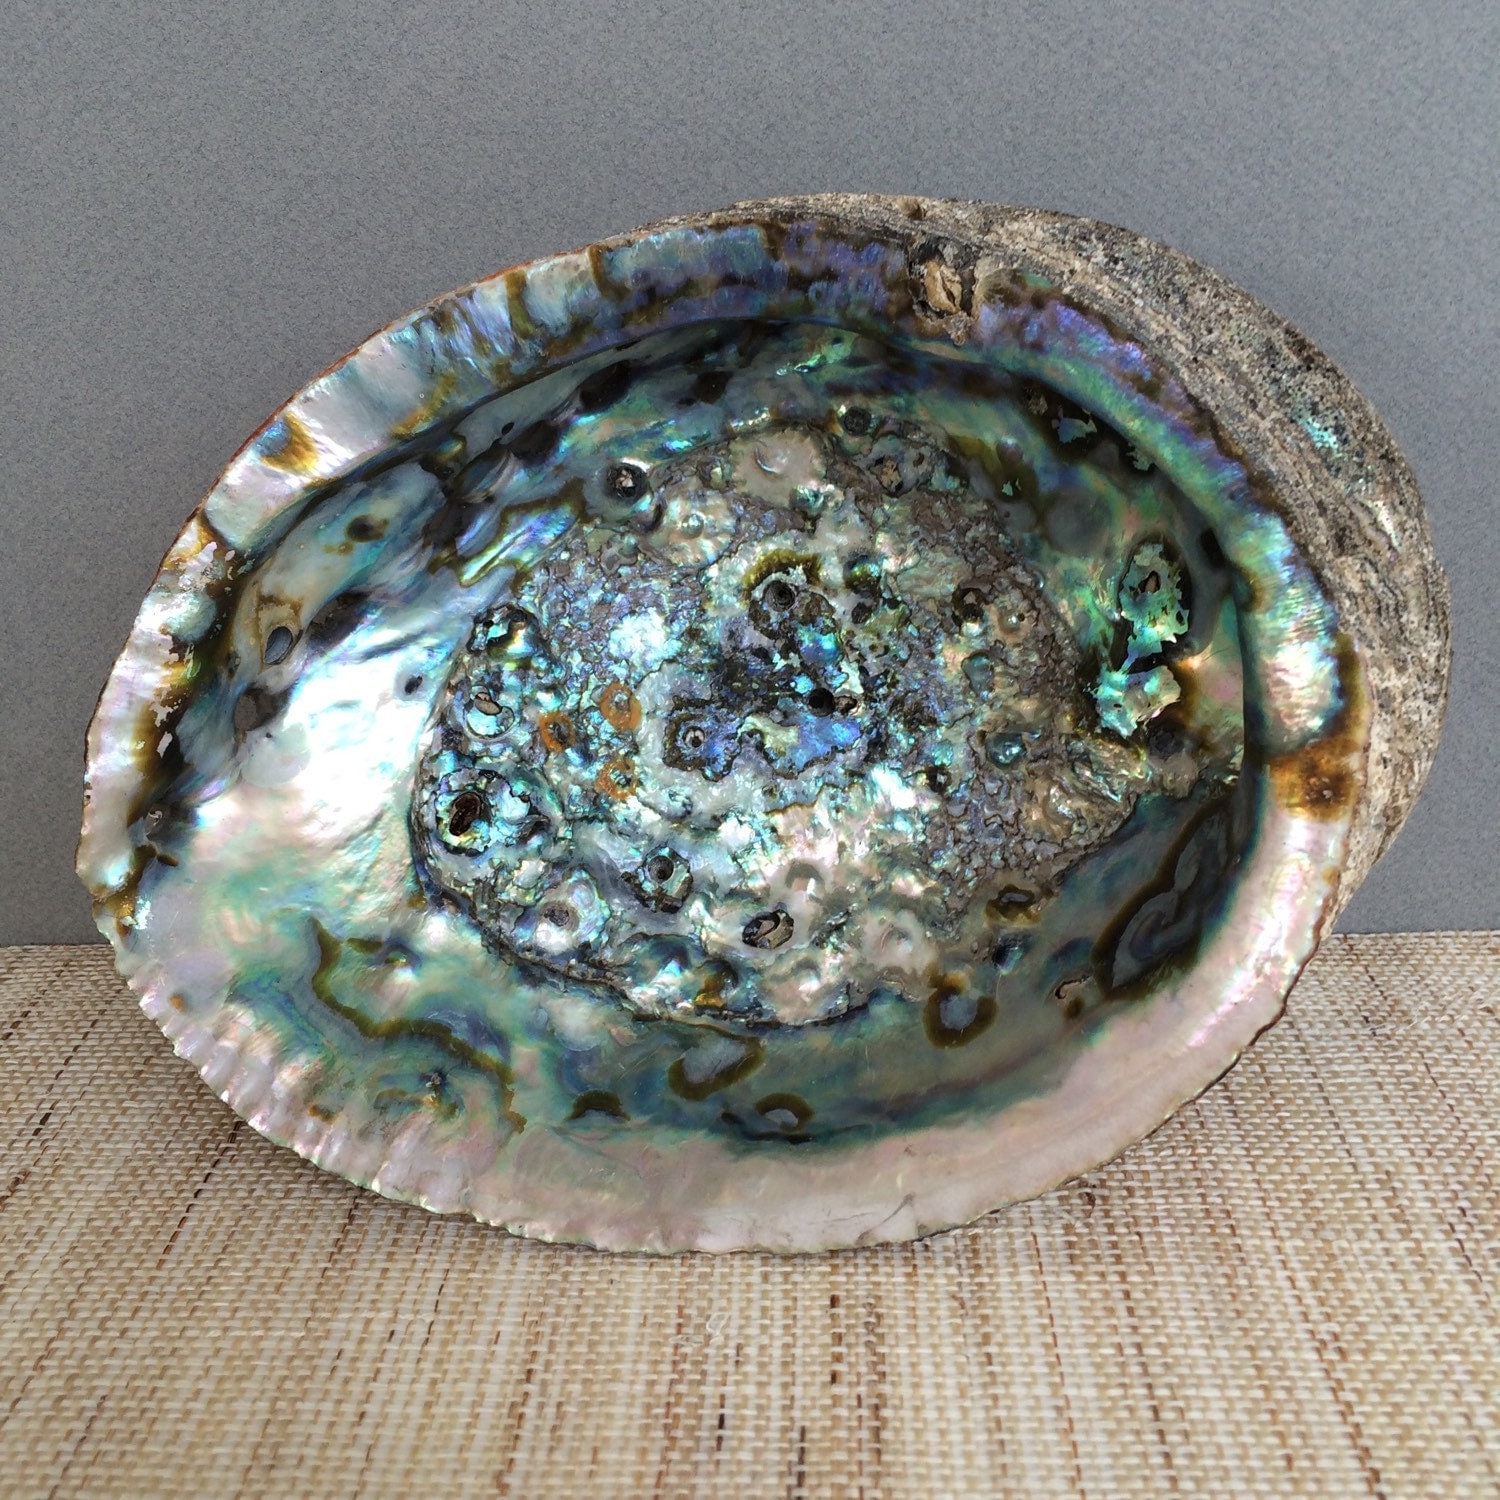 Vintage large abalone shell large by PalmTreesandPelicans on Etsy